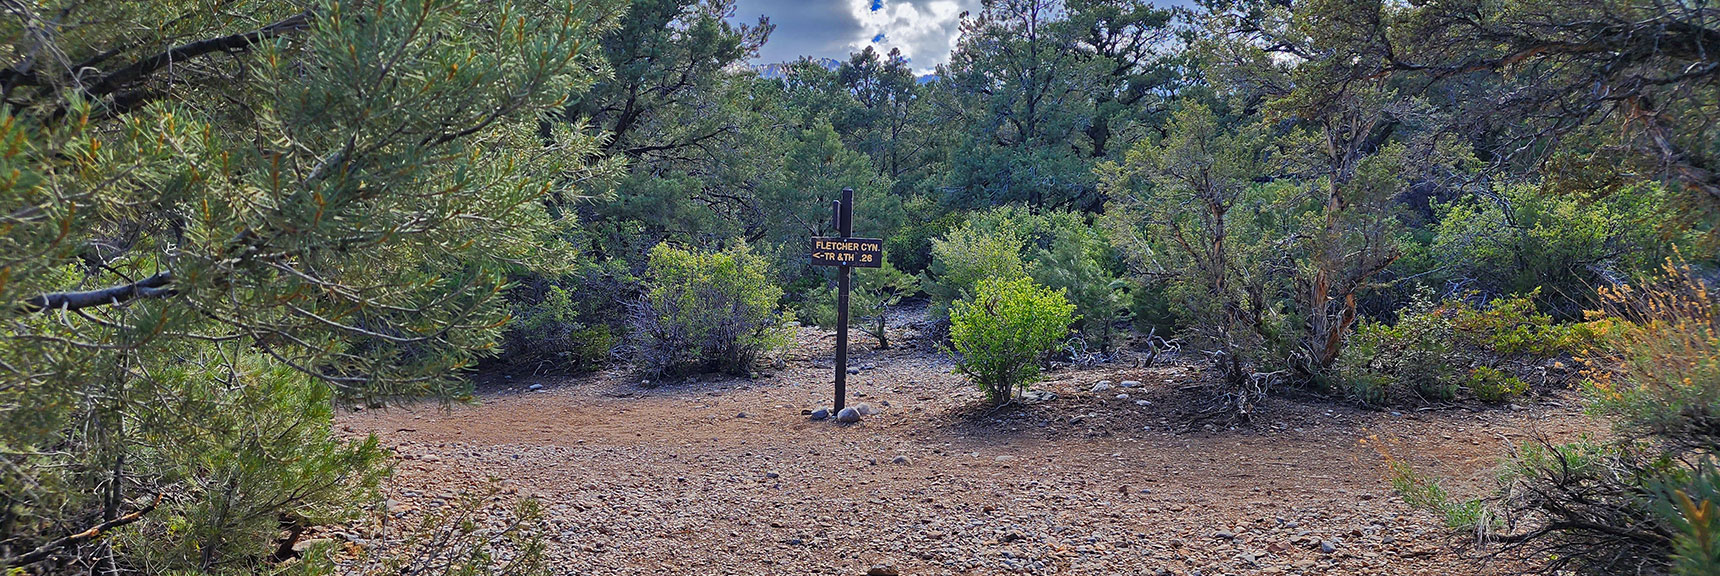 End of Loop, Heading Back to Fletcher Canyon Trail and Trailhead | Eagles Nest Loop | Mt Charleston Wilderness | Spring Mountains, Nevada